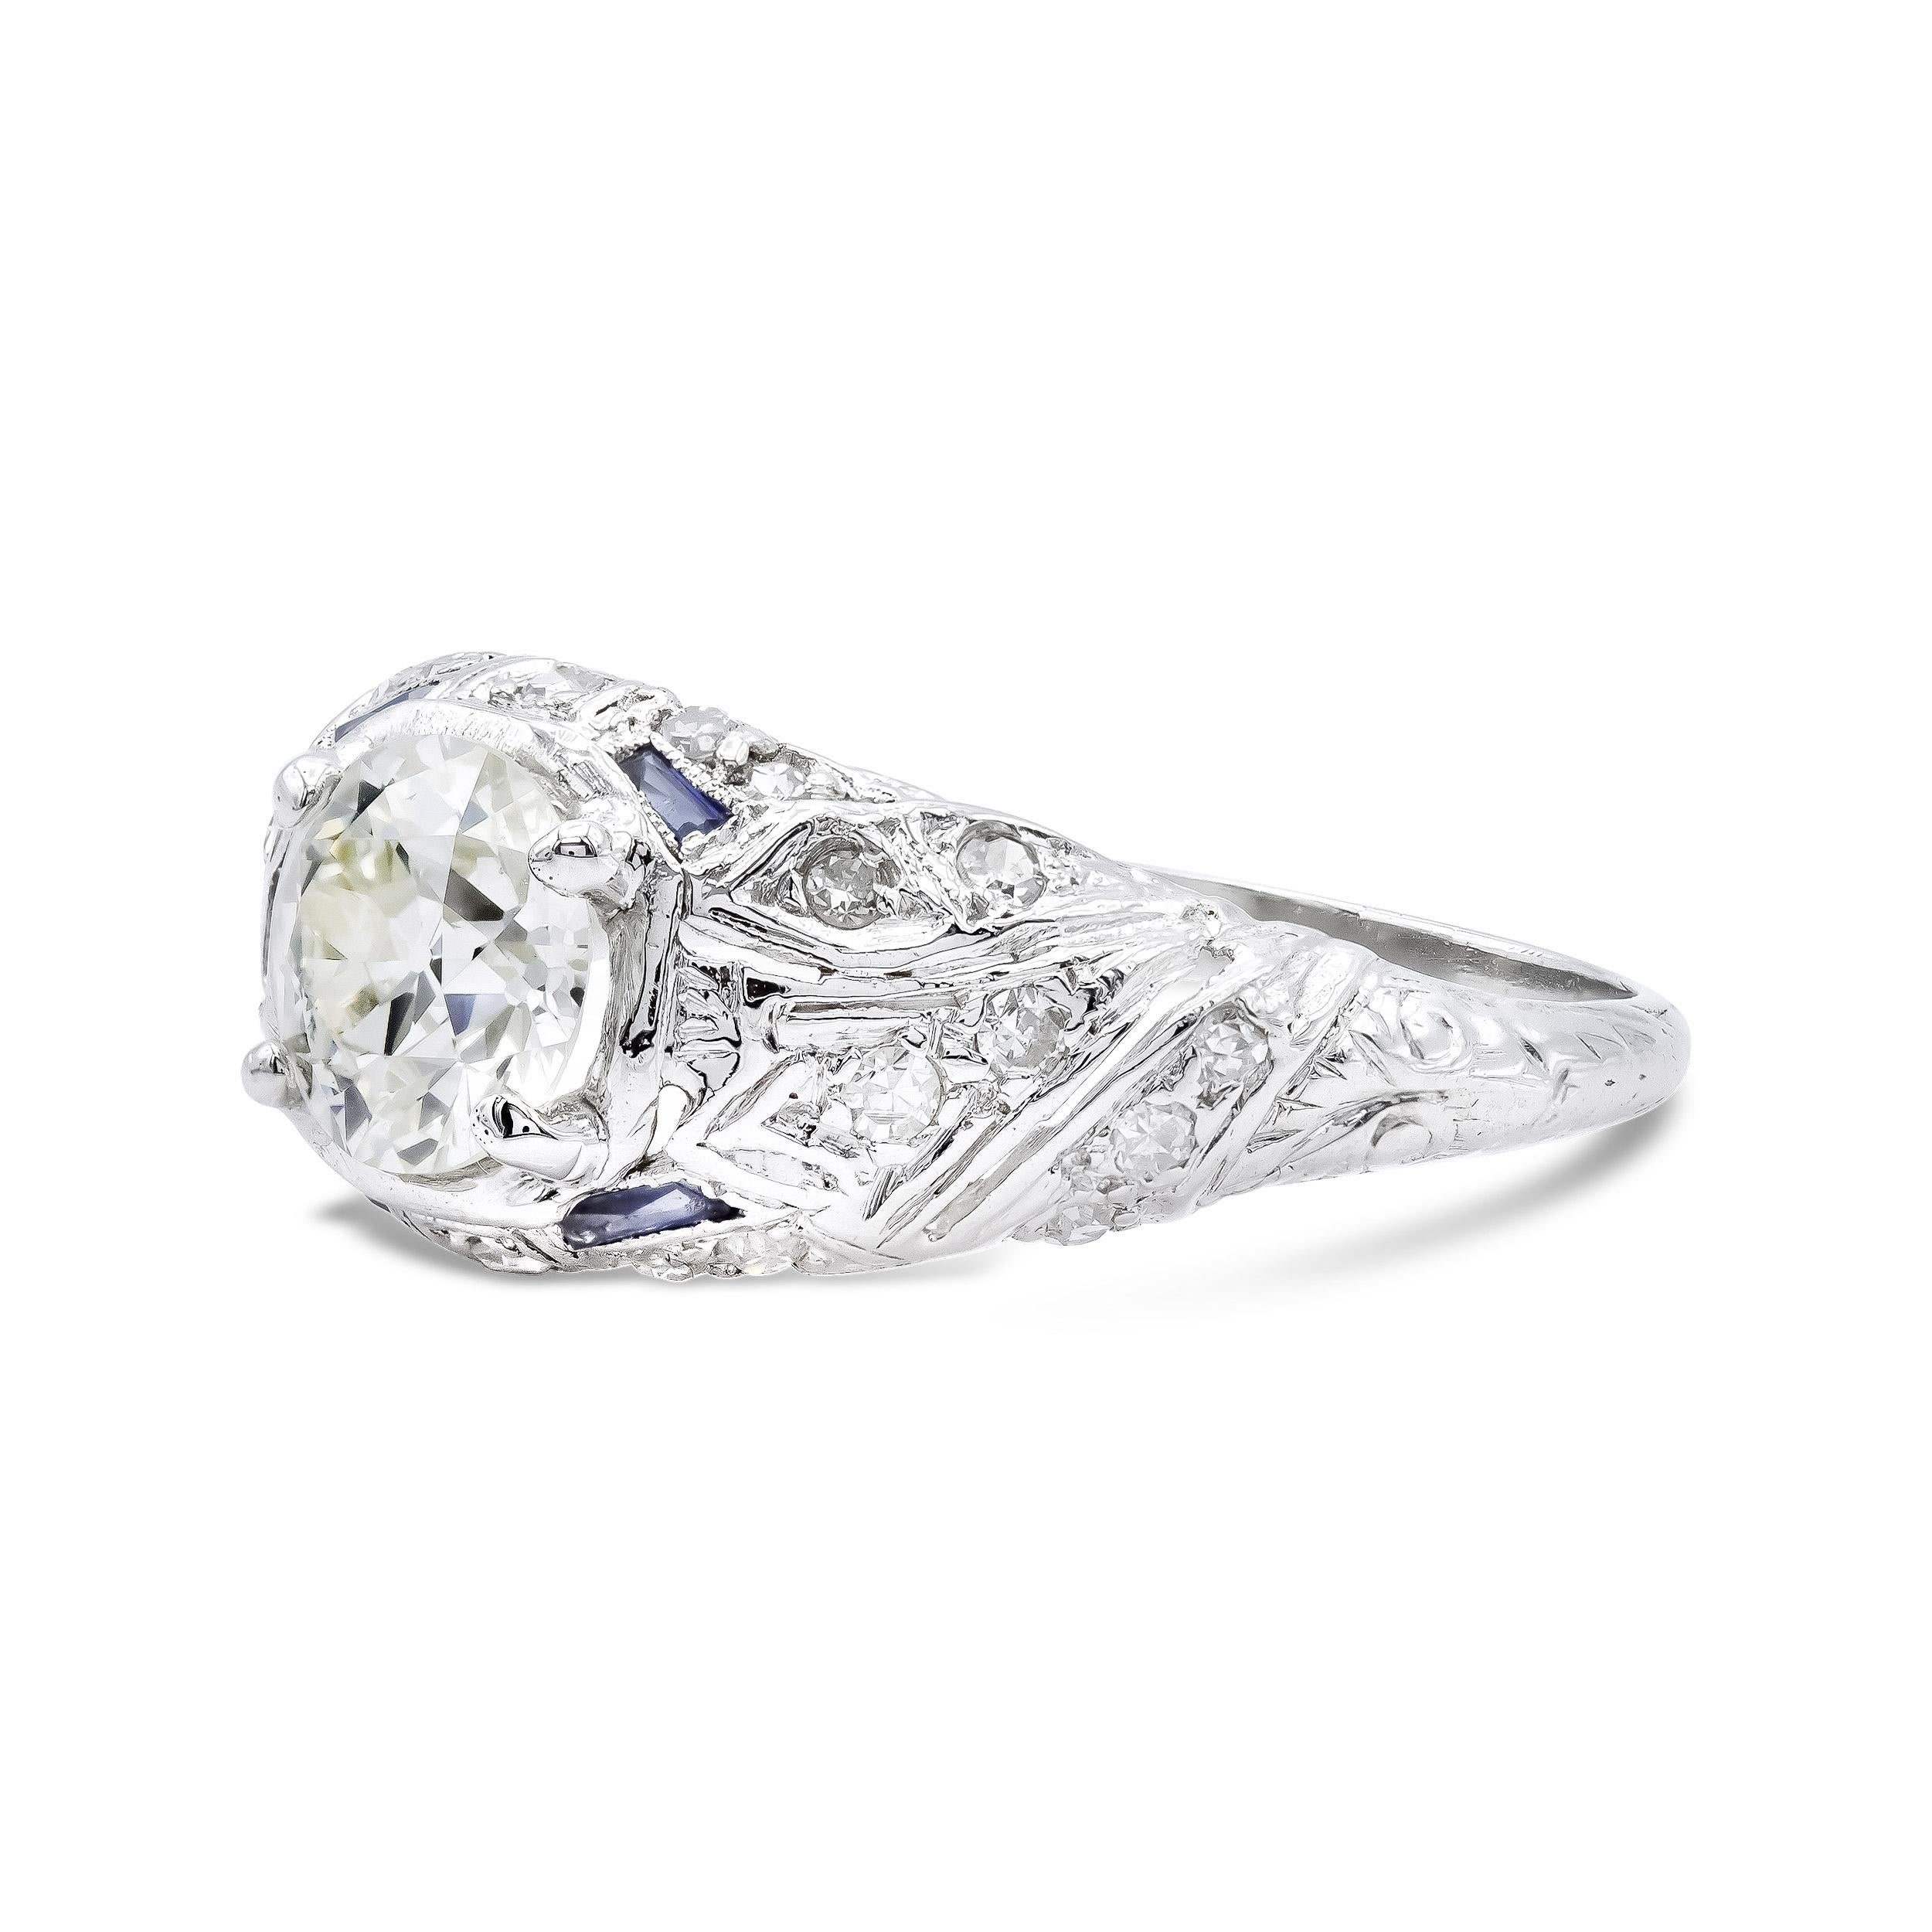 The swooping filigree design adorning this ring has us in a trance. Centering the deco-era design is a 1.02 carat old European with a distinct facet pattern and so much spread. It practically floats above the ring, enhanced by droplets of